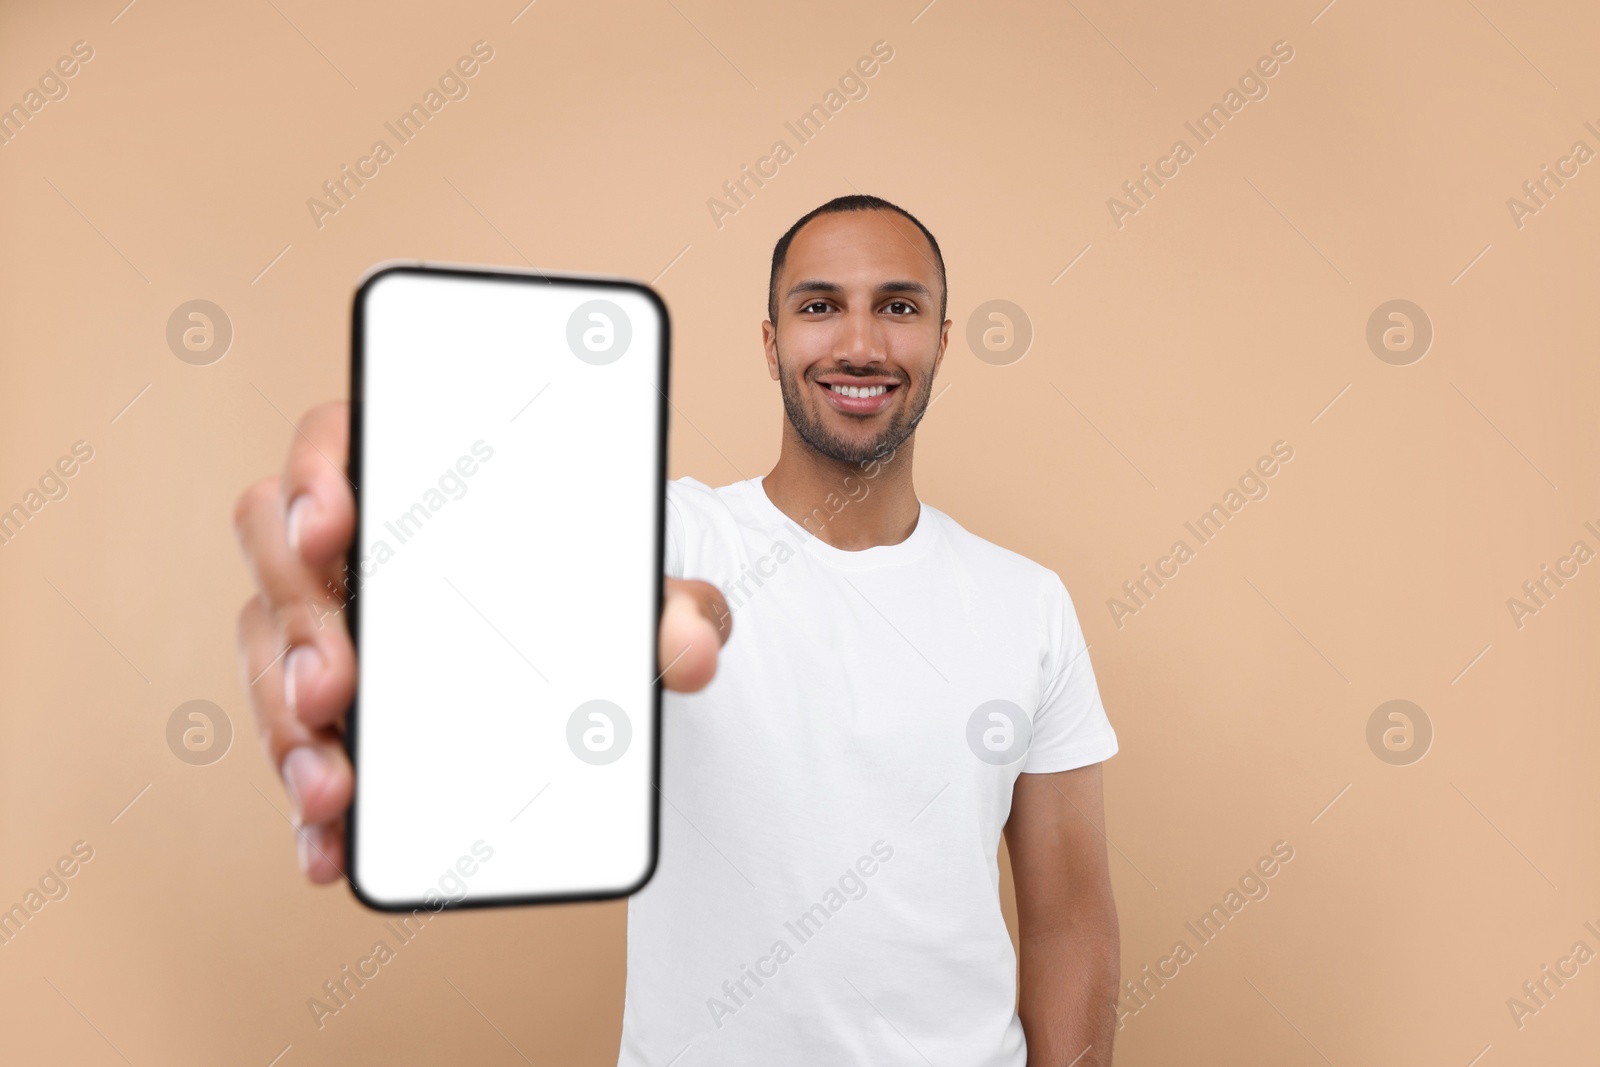 Photo of Young man showing smartphone in hand on beige background